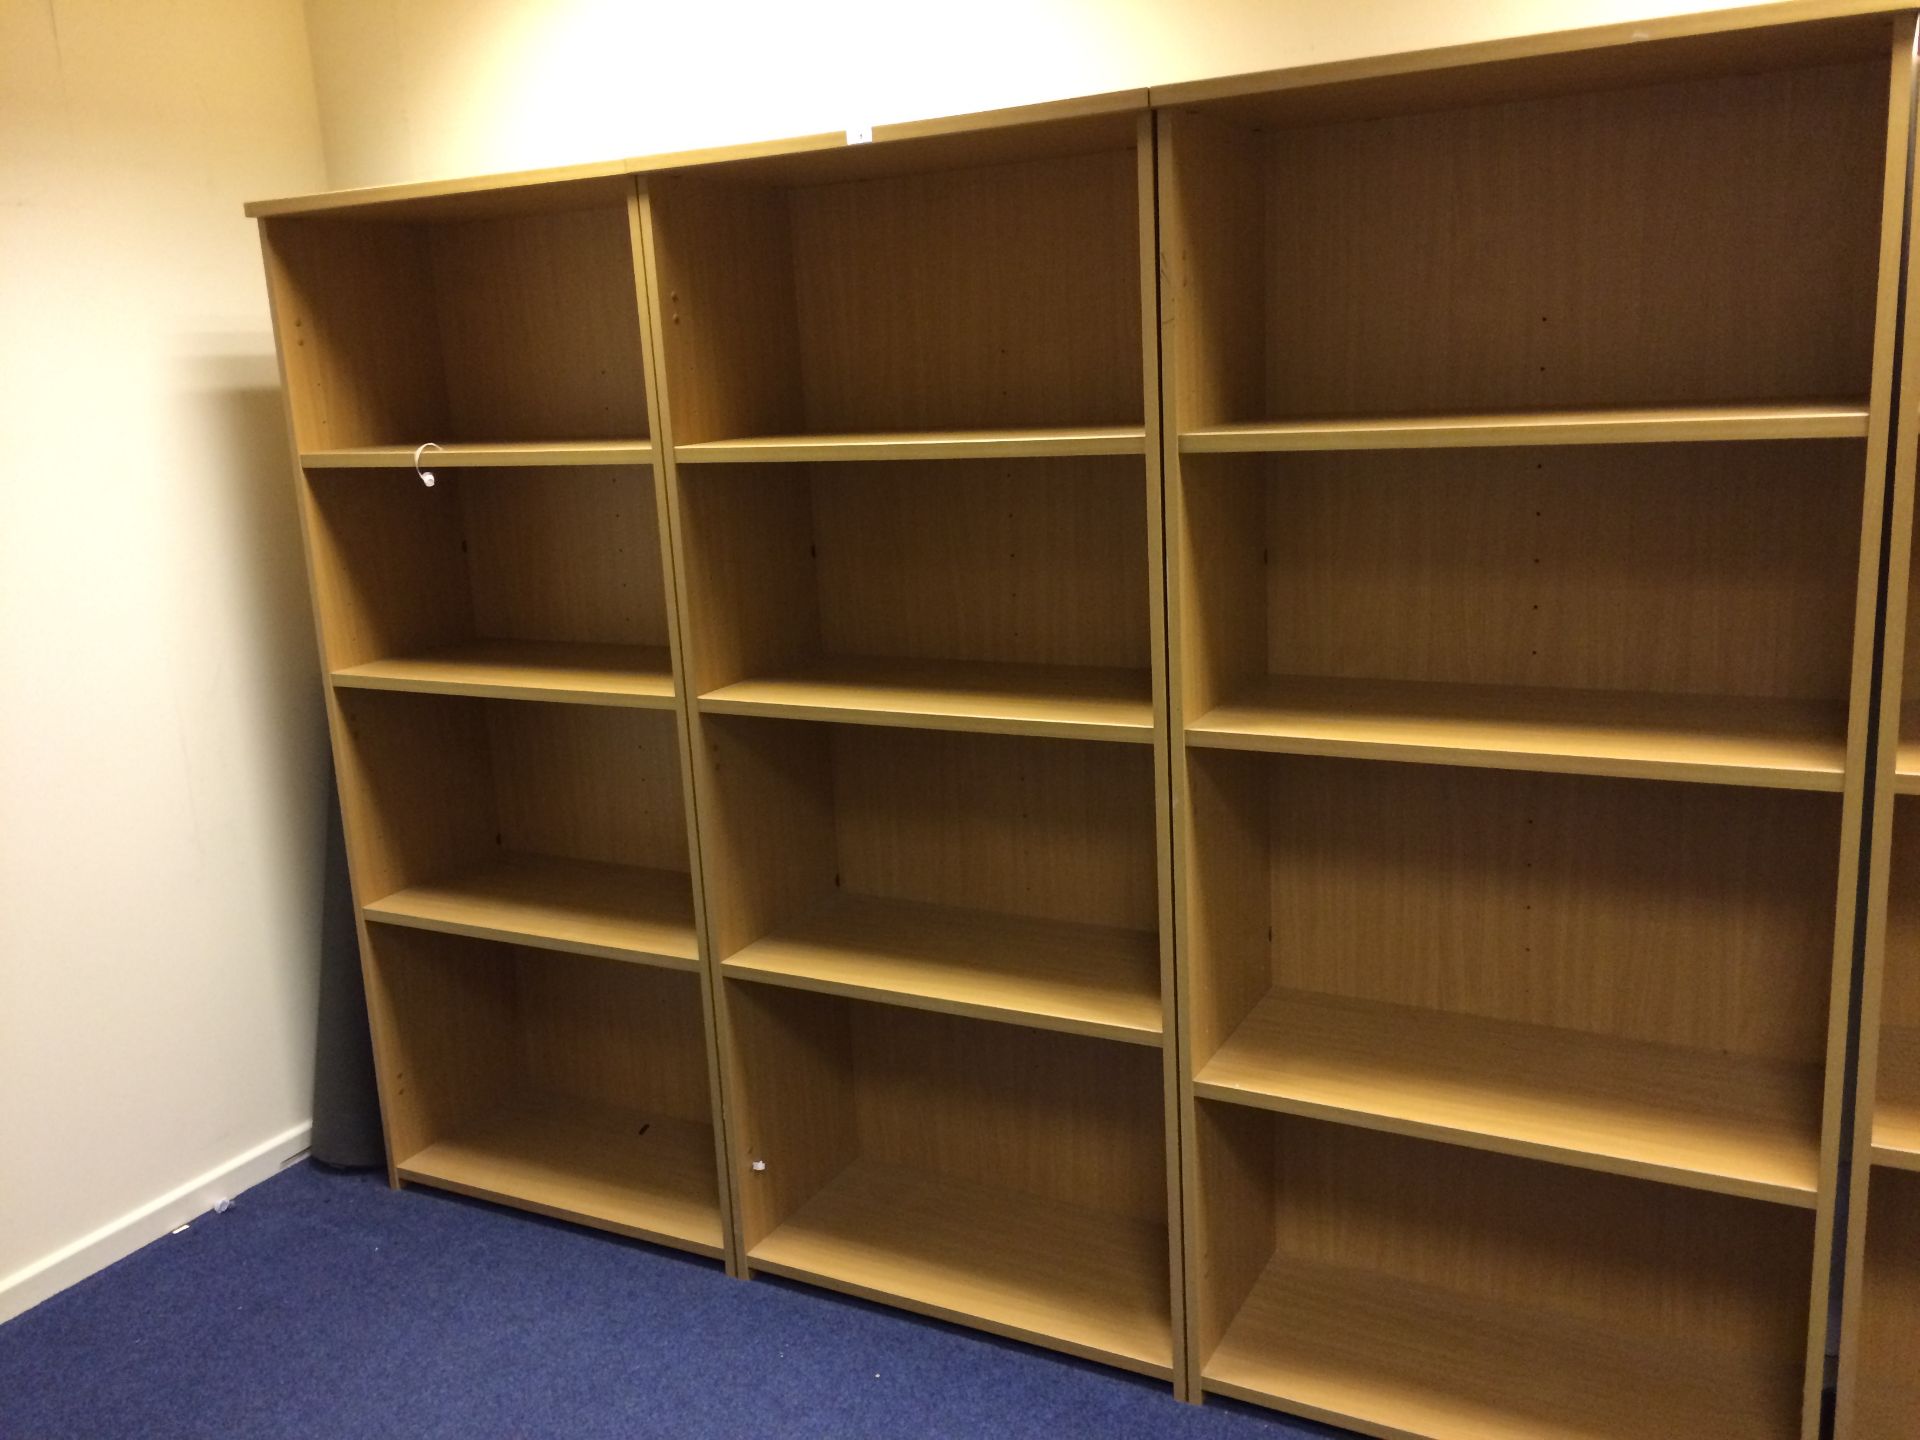 3 x 4 shelf pine bookcases 180cm high x 80cm wide (location Bradford please see lot 1A for further